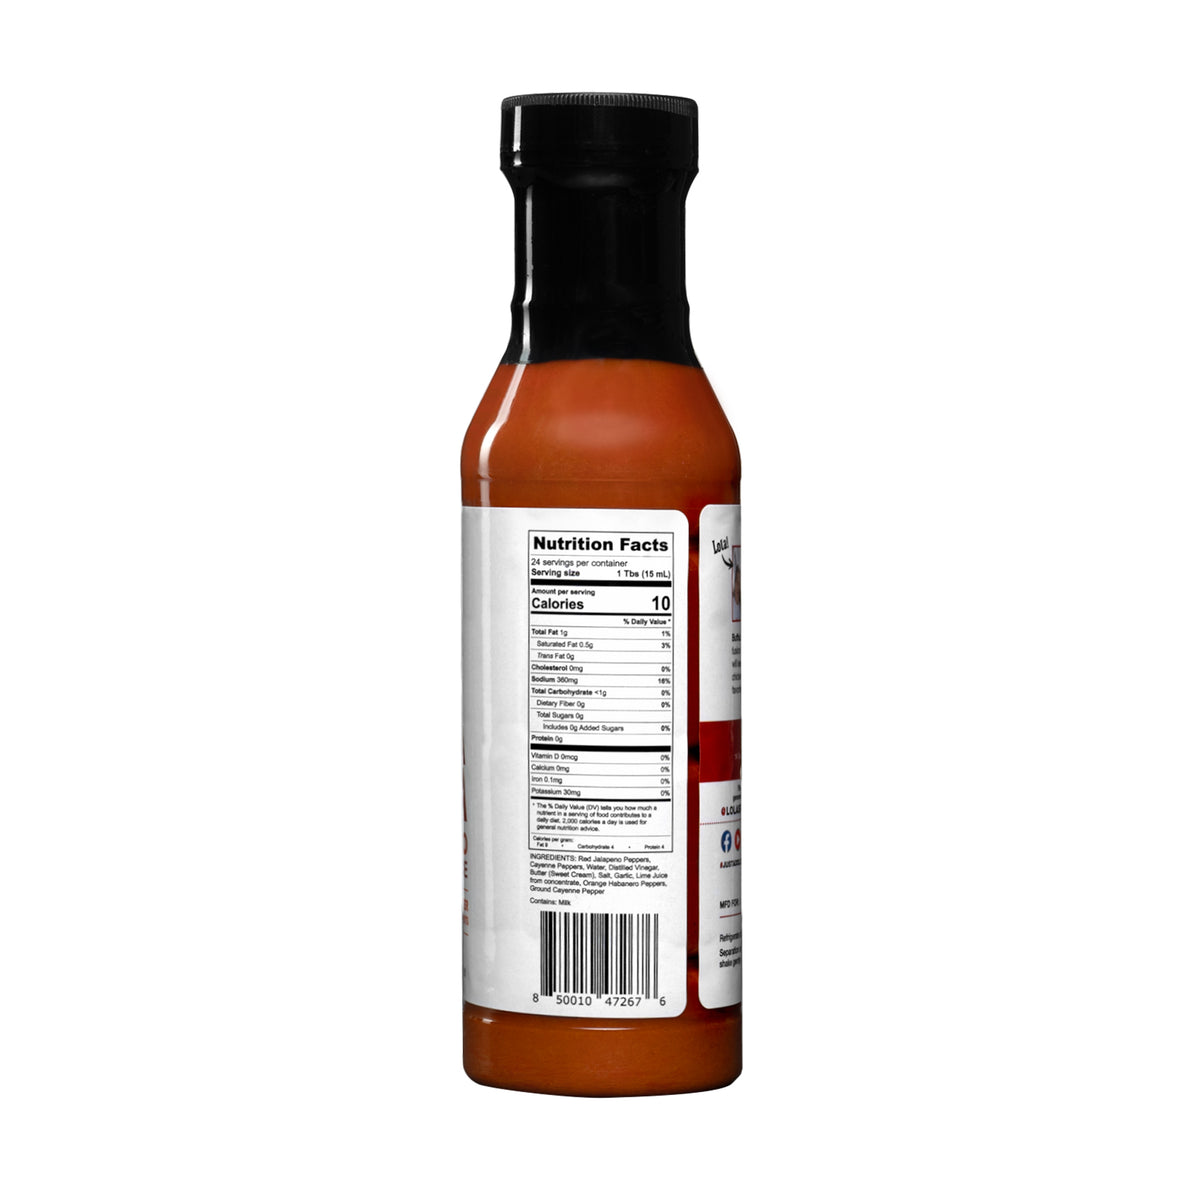 Lola's Buffa-Lola Wing Sauce - A bottle of mouthwatering Buffalo sauce made with real butter, fresh peppers, and red jalapeños. Perfect for wings, pizza, or dips.